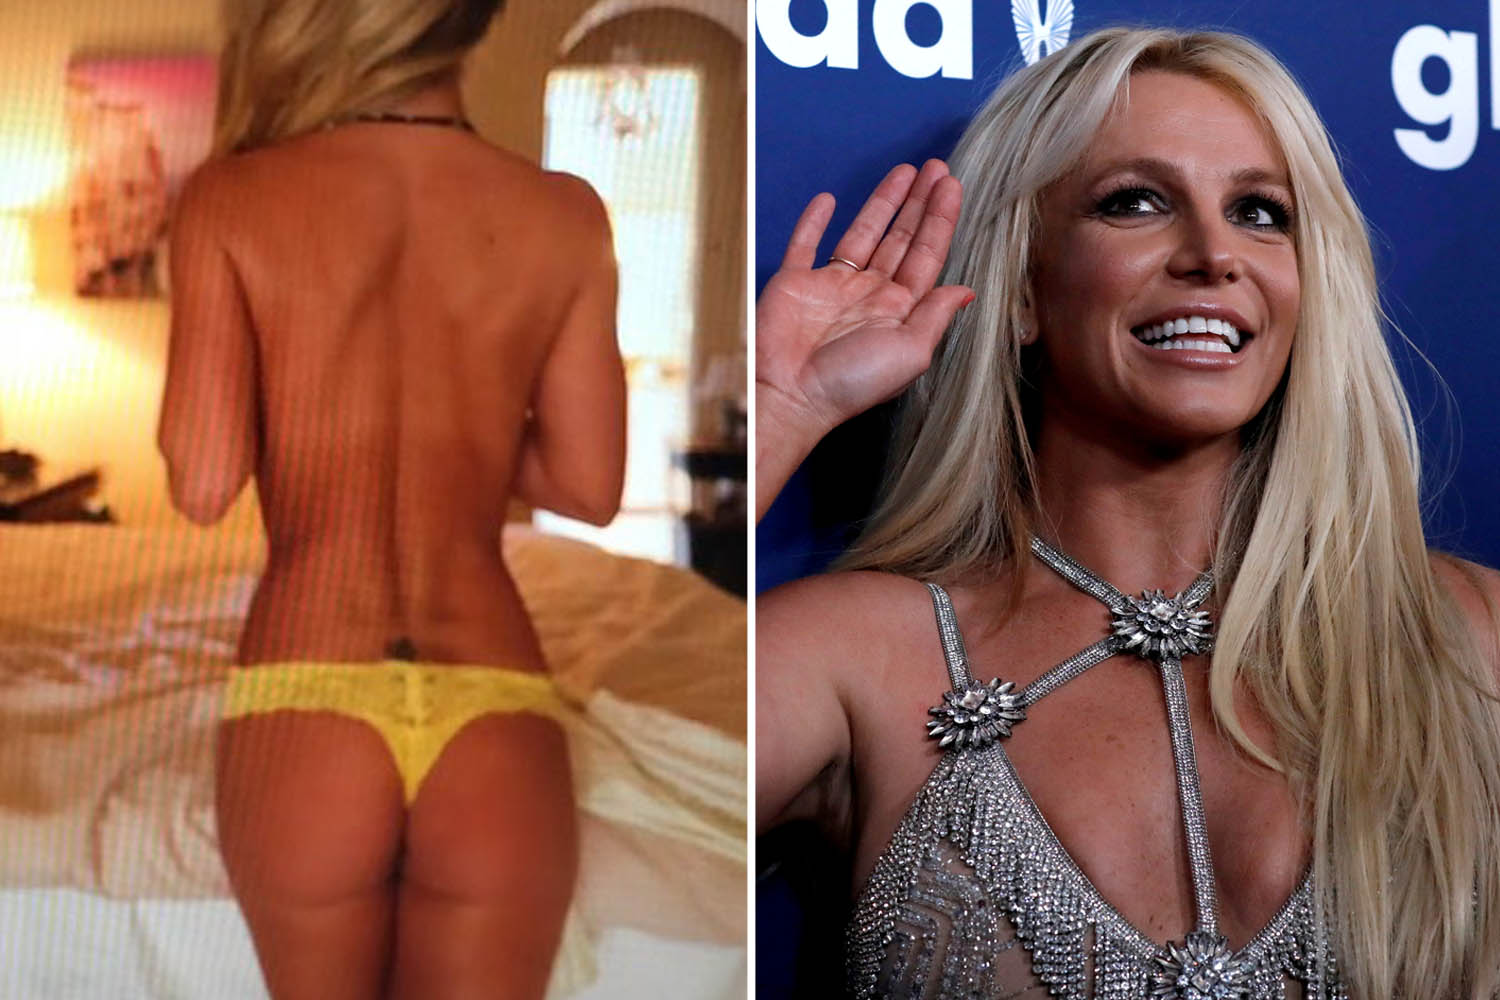 andy ralston recommends britney spears in thong pic